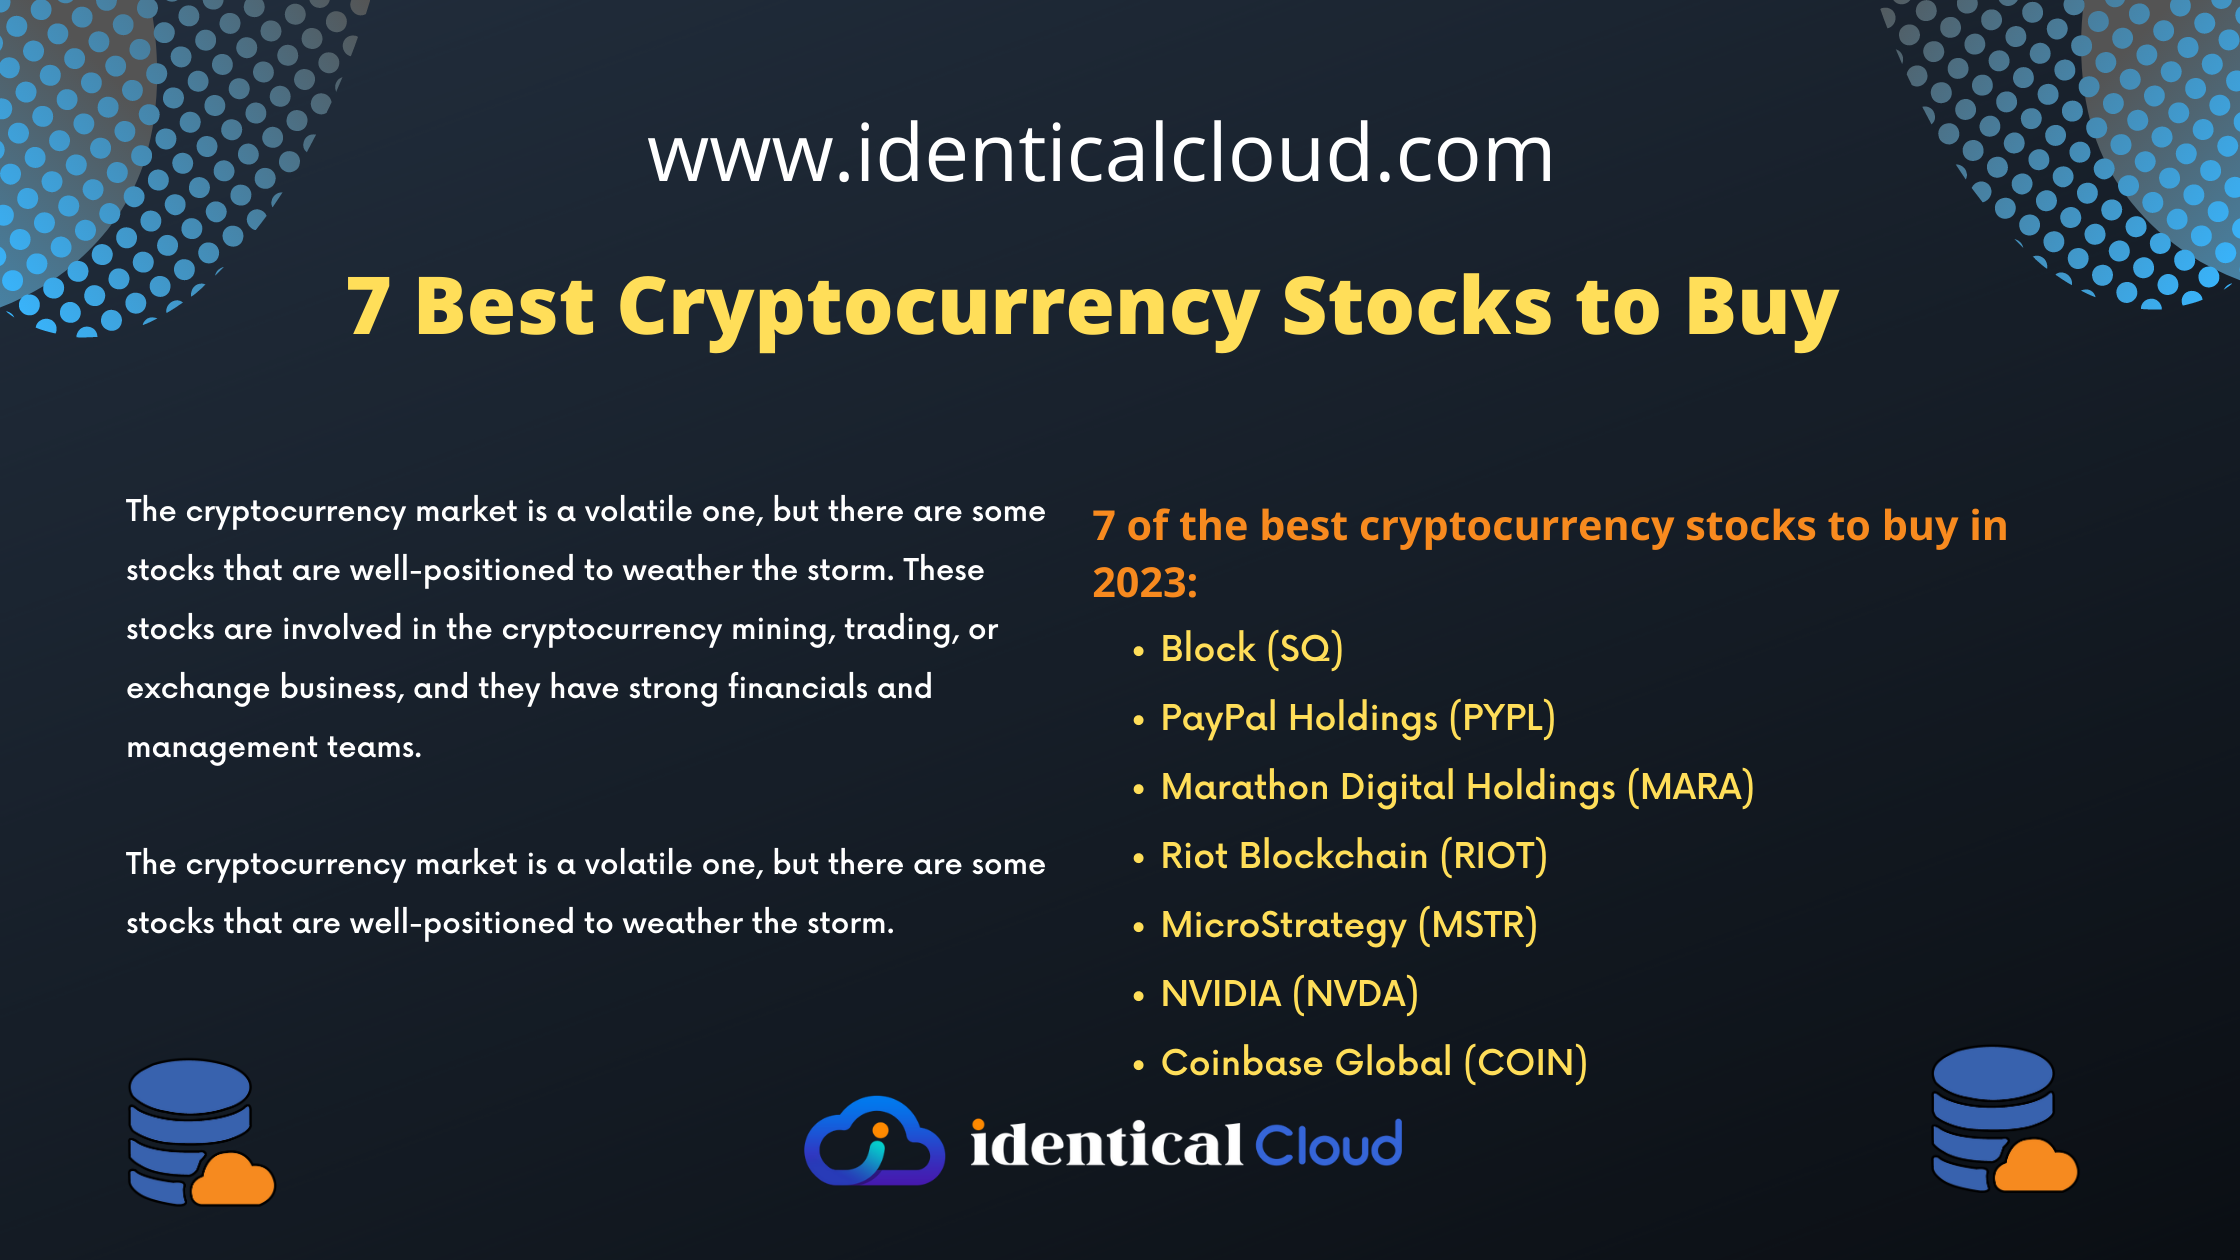 7 Best Cryptocurrency Stocks to Buy - identicalcloud.com